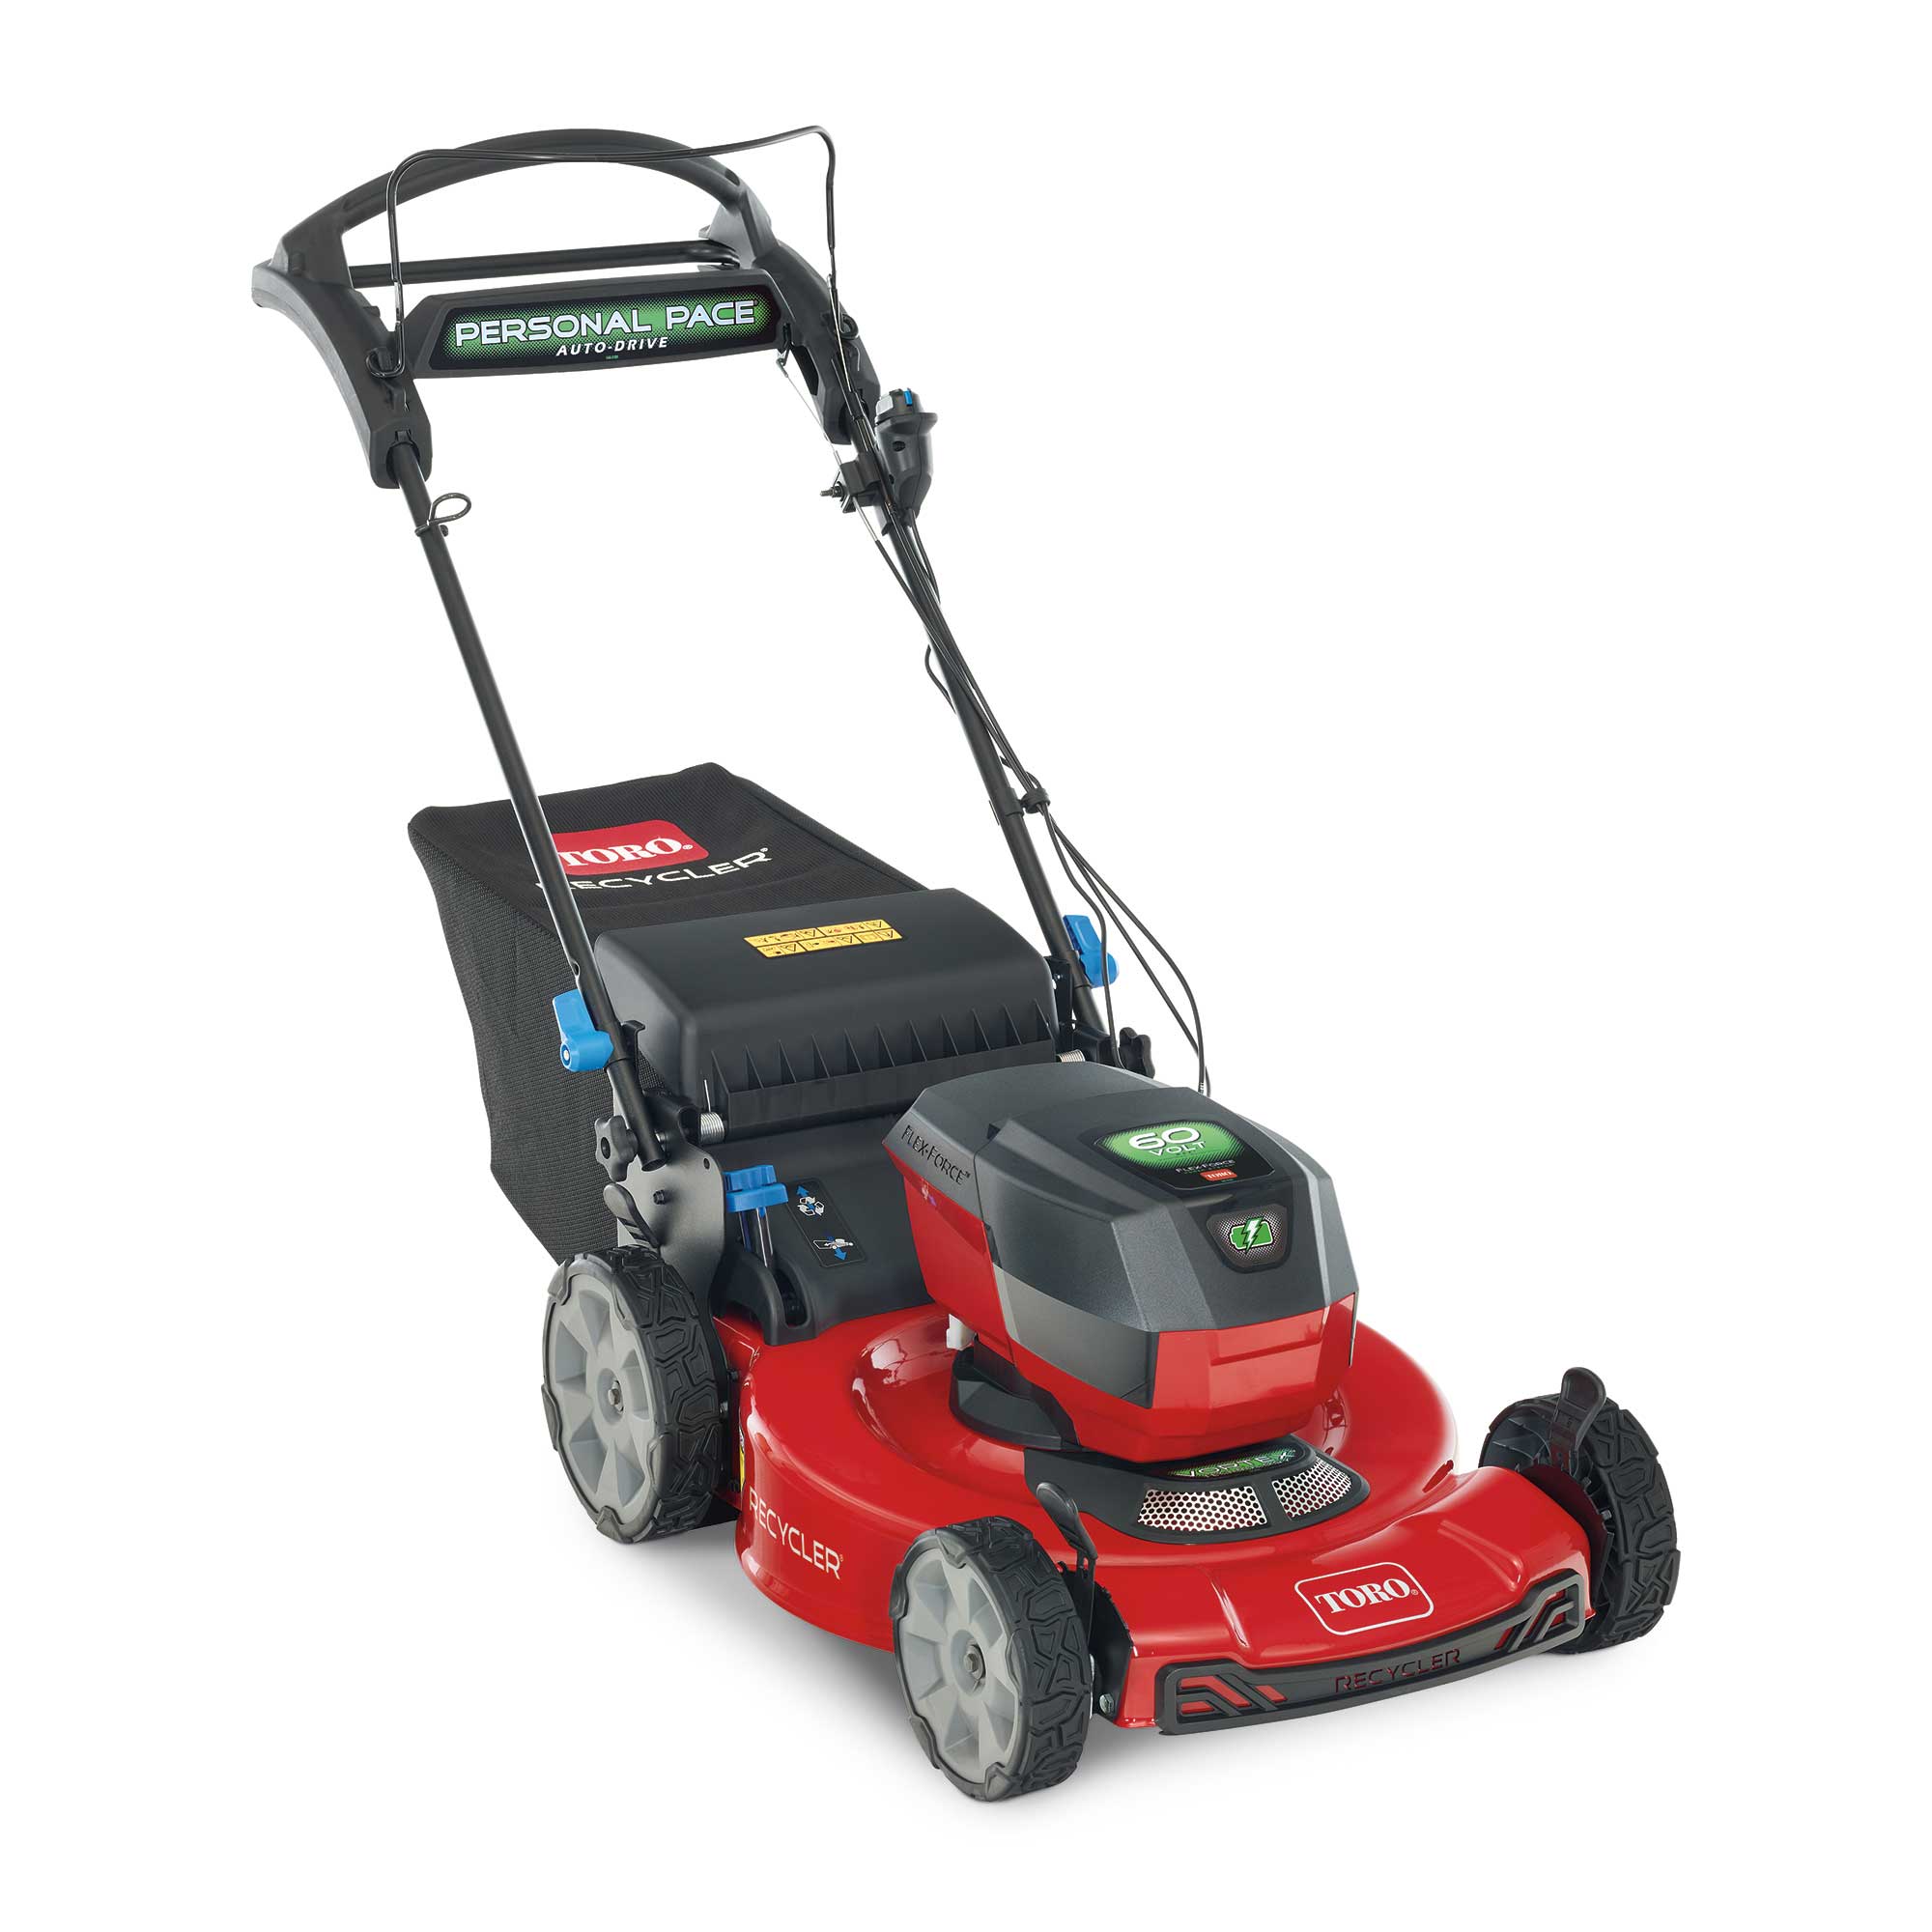 Lawn Mowers, Gas & Electric Lawn Mowers for Homeowners, Toro